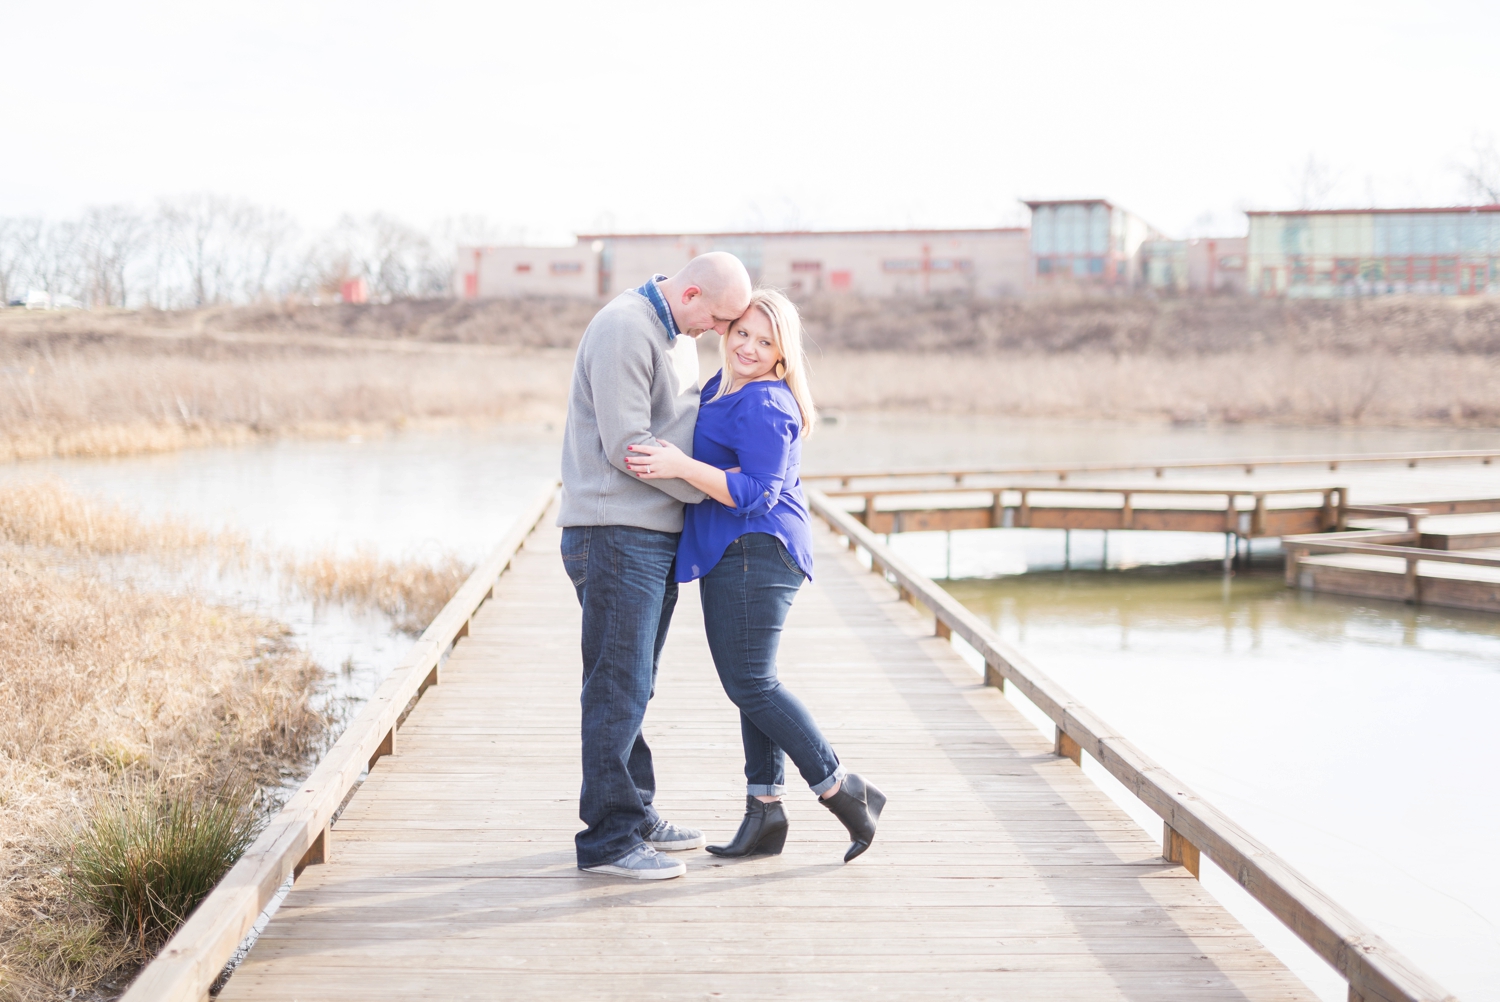 winter-engaged-couple-at-their-photo-session-at-the-scioto-audubon-park-near-grange-audubon-center-with-walkways-and-grass_0313